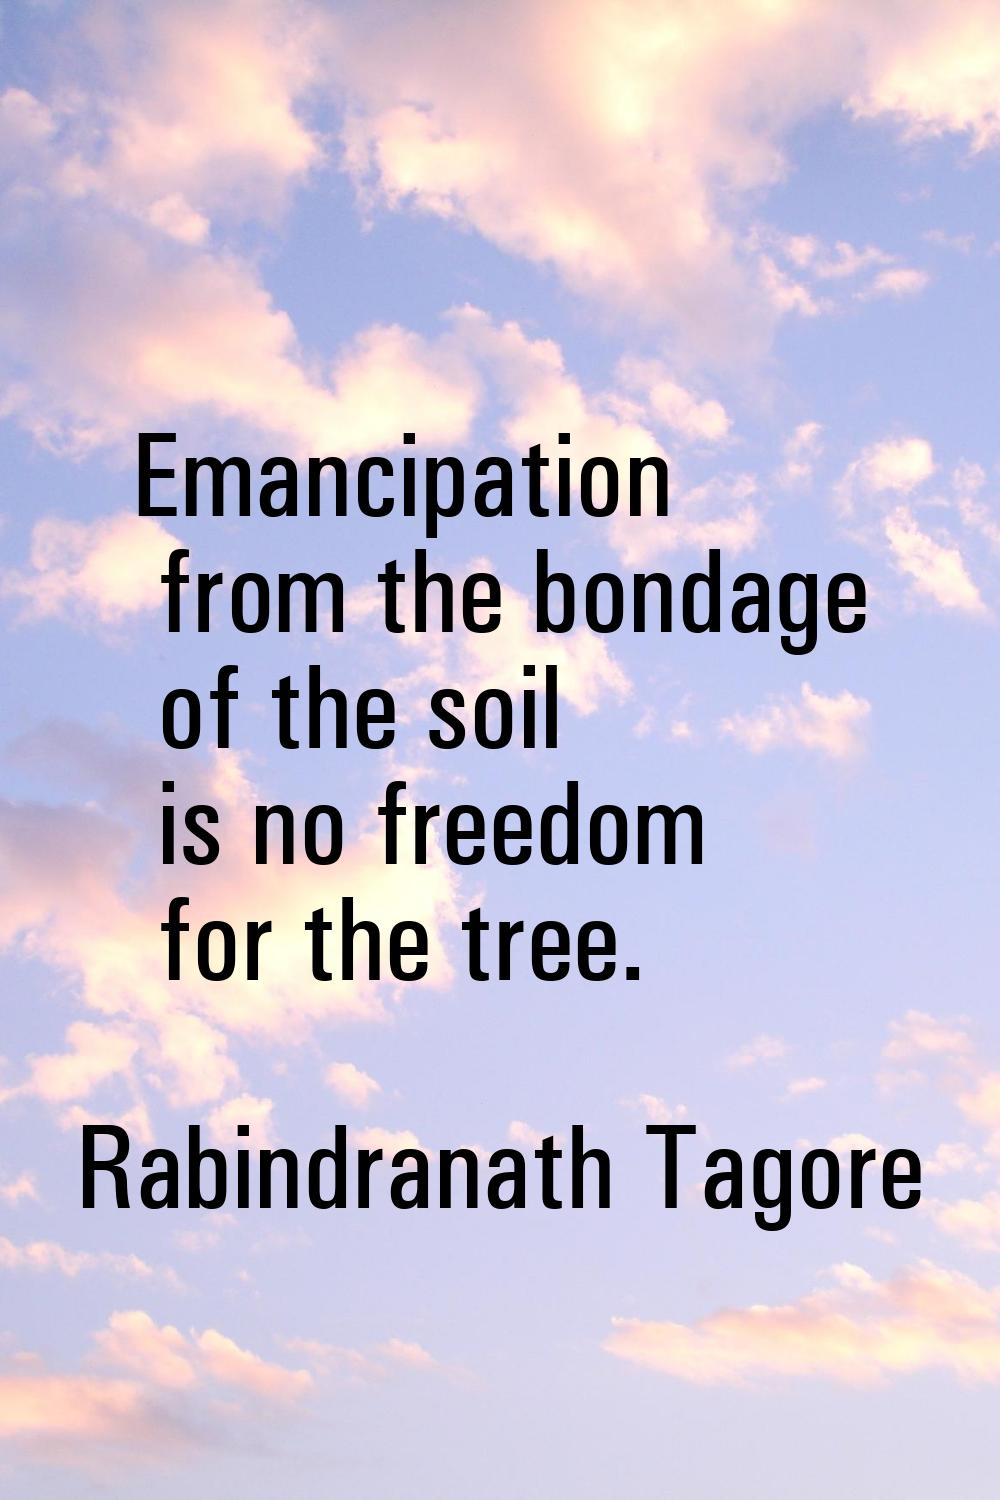 Emancipation from the bondage of the soil is no freedom for the tree.